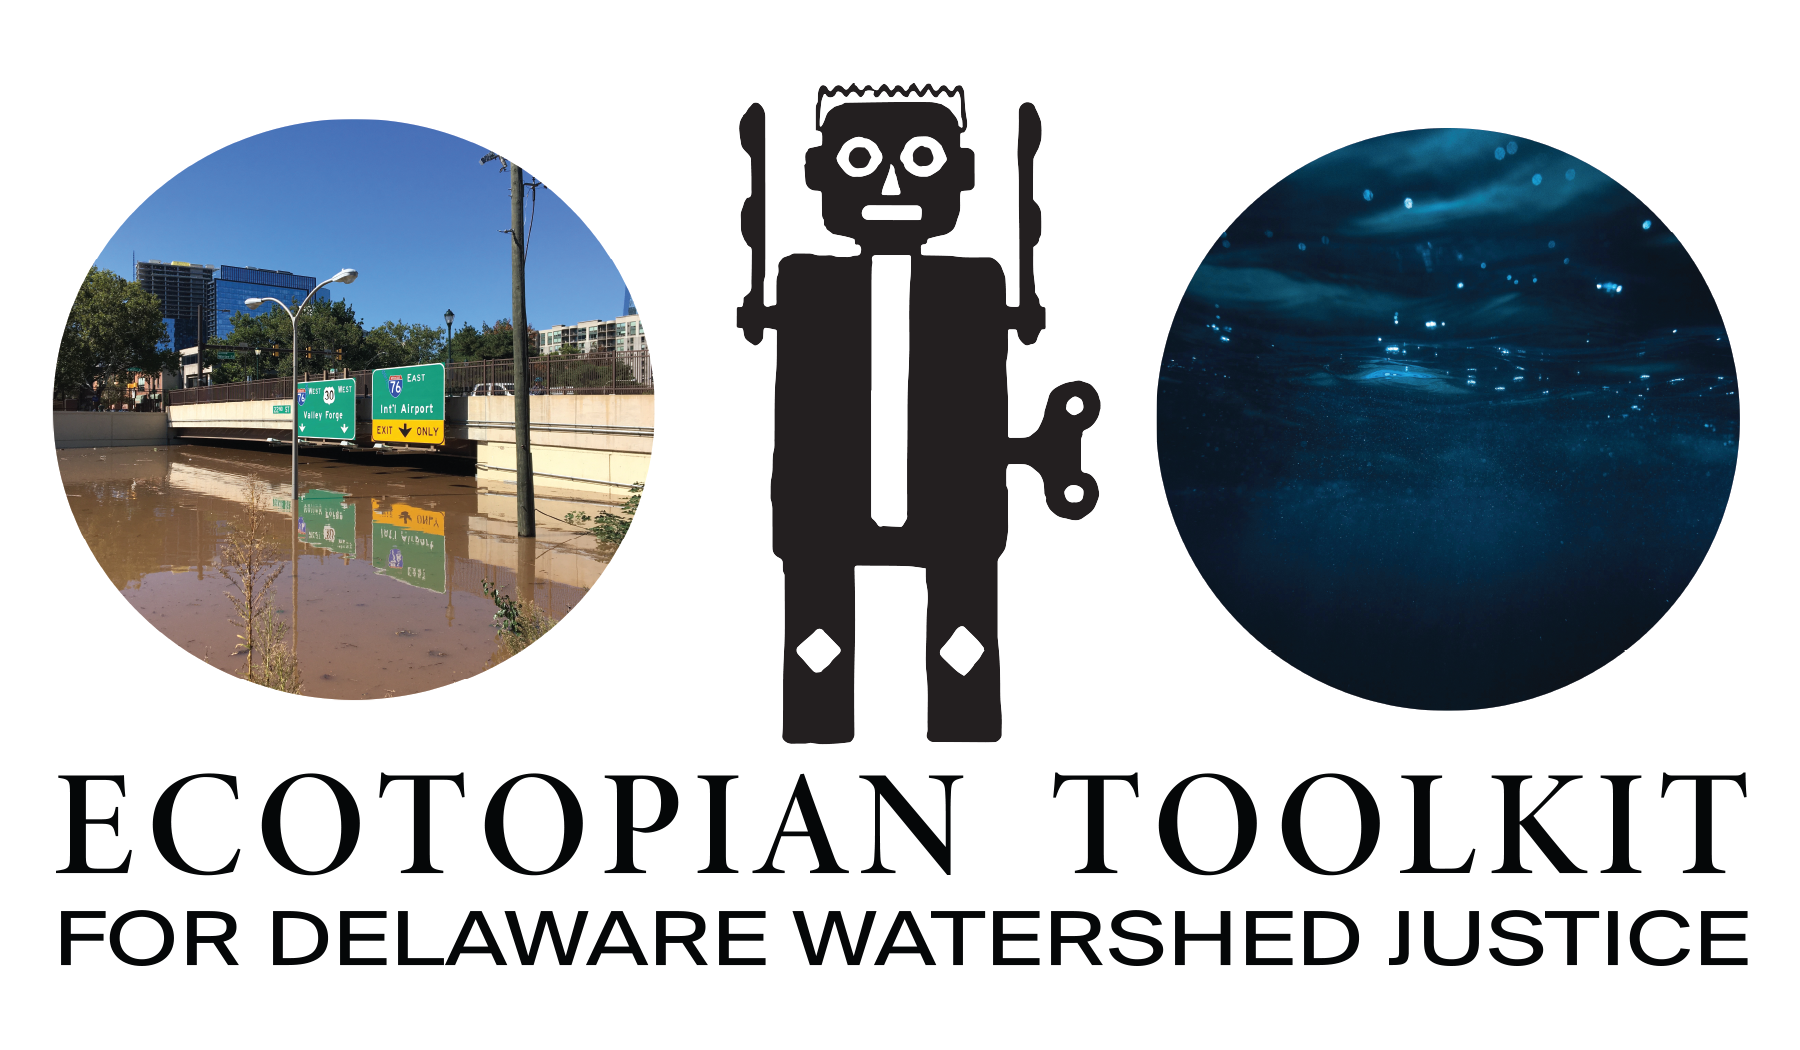 Three images of highway submerged with water, robot, and underwater scene that says Ecotopian Toolkit for Delaware Watershed Justice